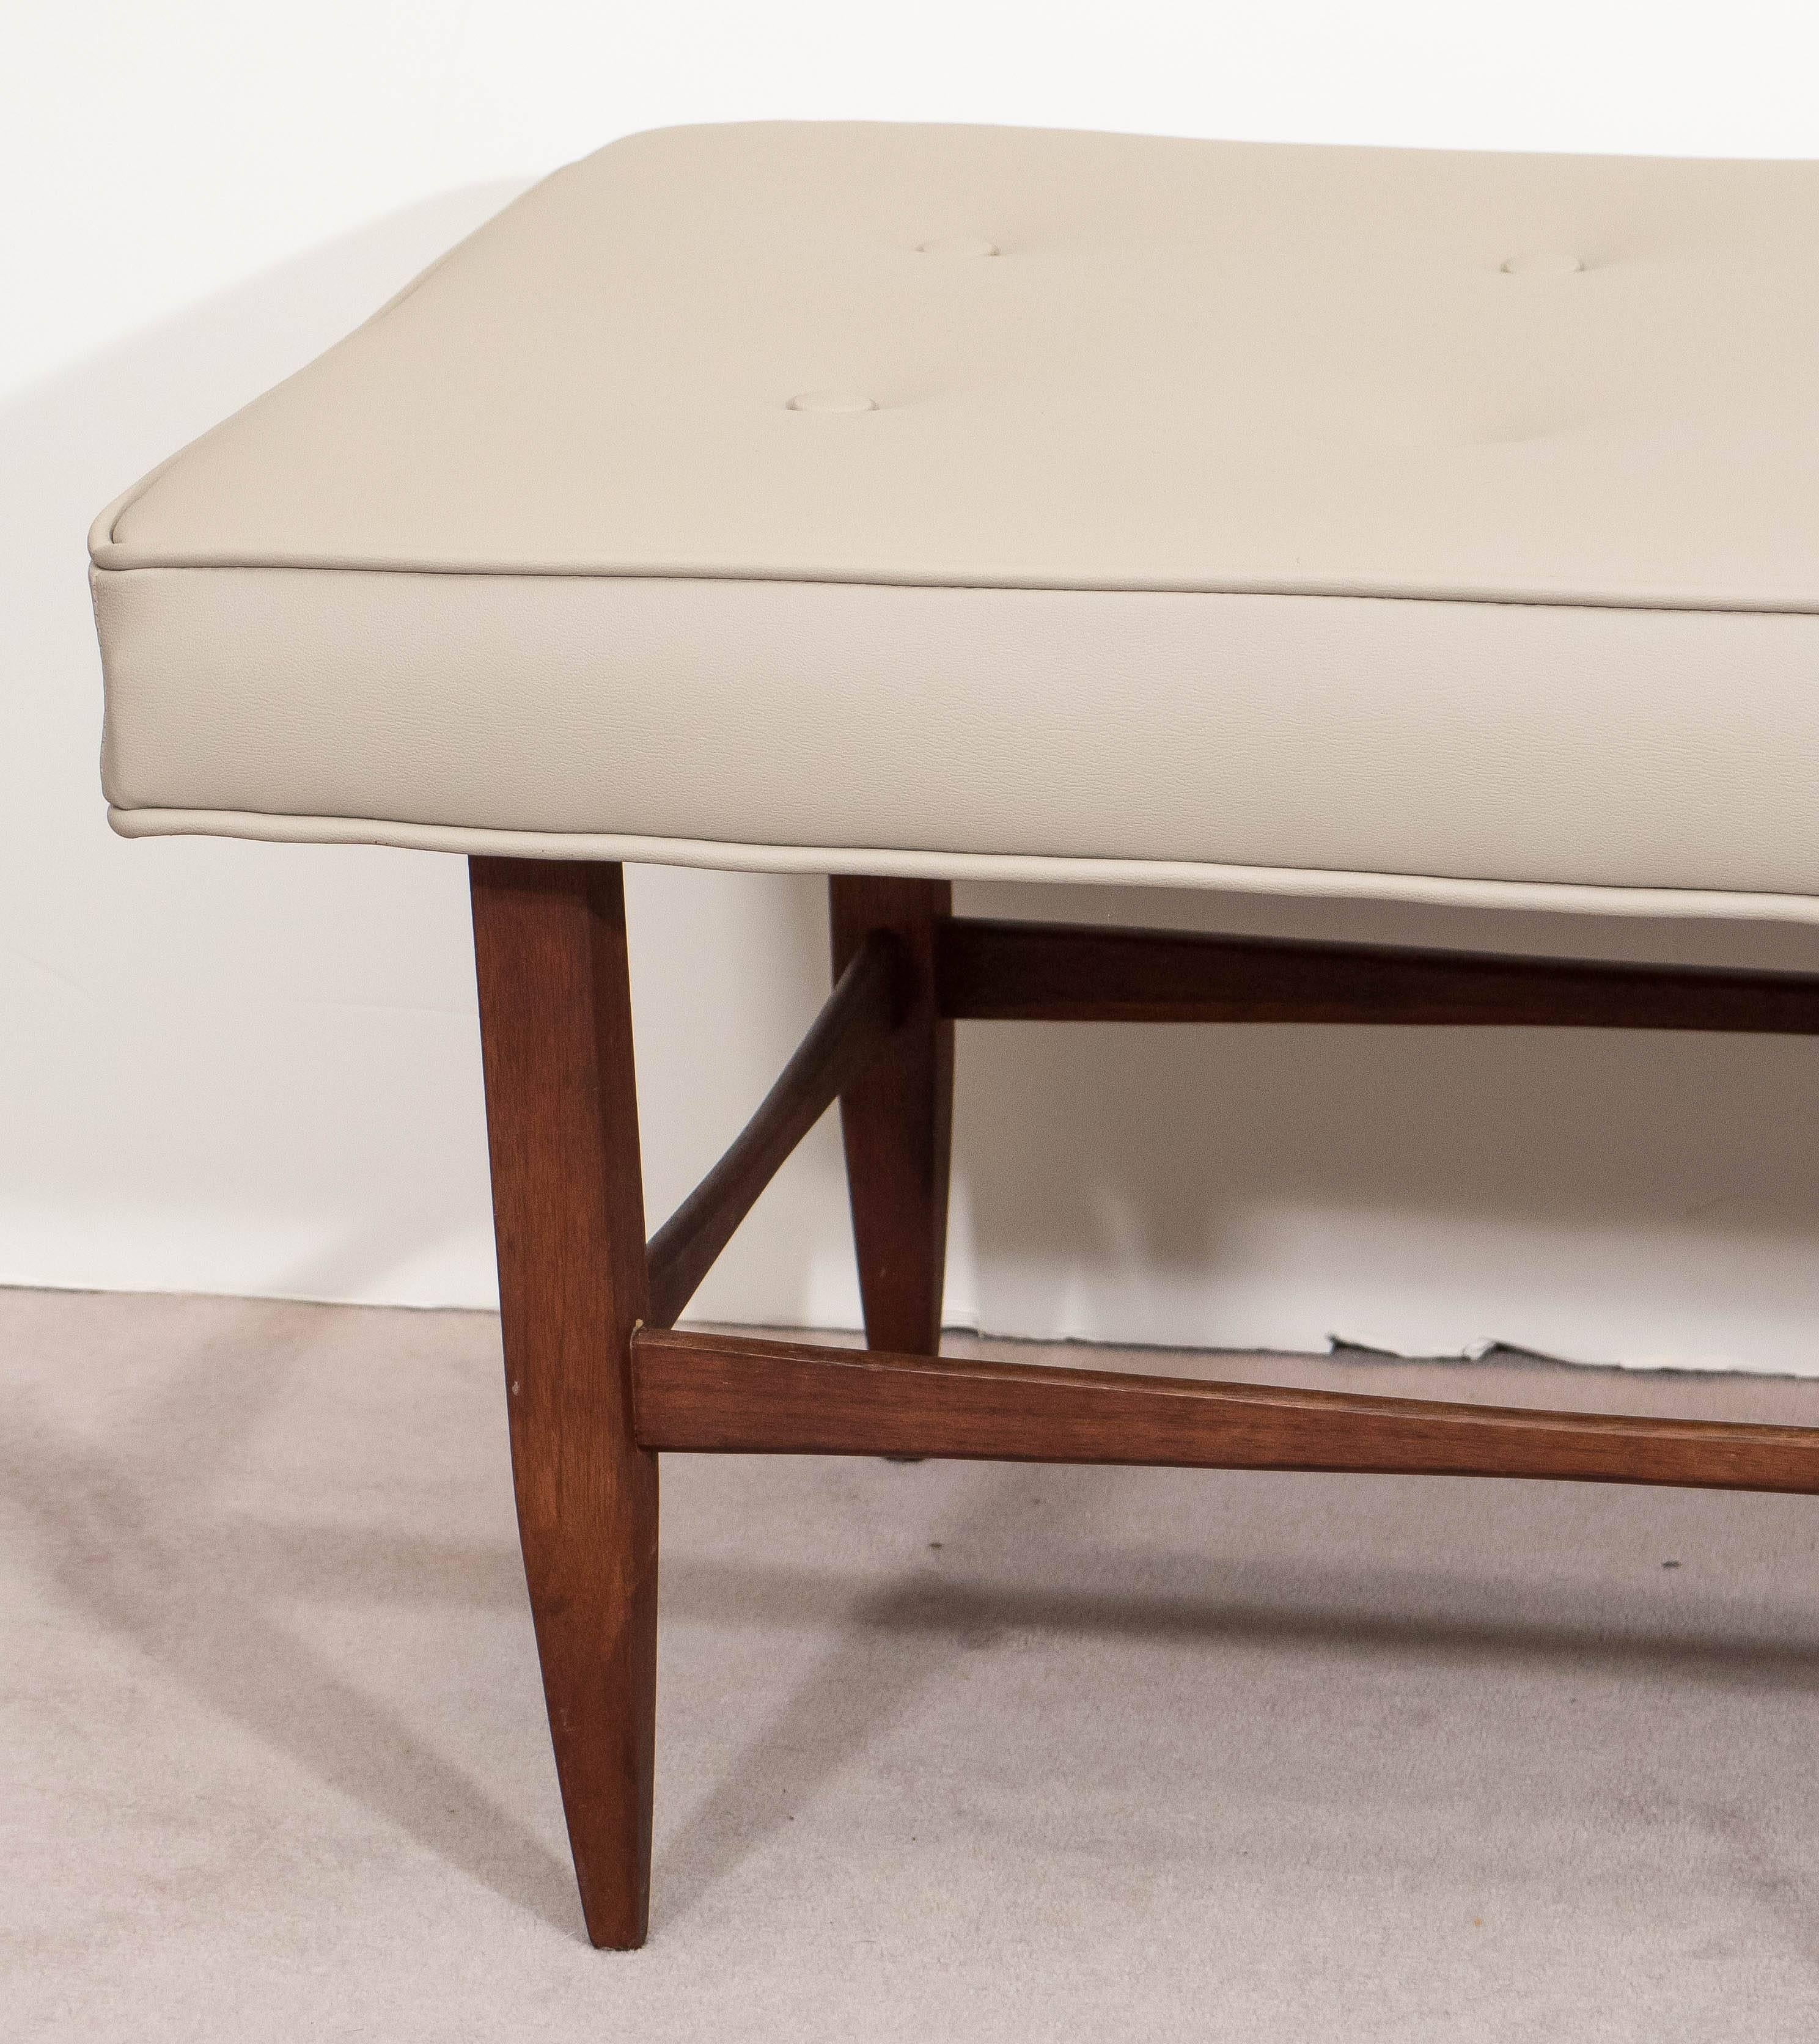 A vintage lengthy bench, with cushioned tufted seat in beige vinyl, against a wooden frame, on six squared tapered legs, with curved stretcher bars. This bench remains in excellent condition, with some presence of wear to base consistent with age